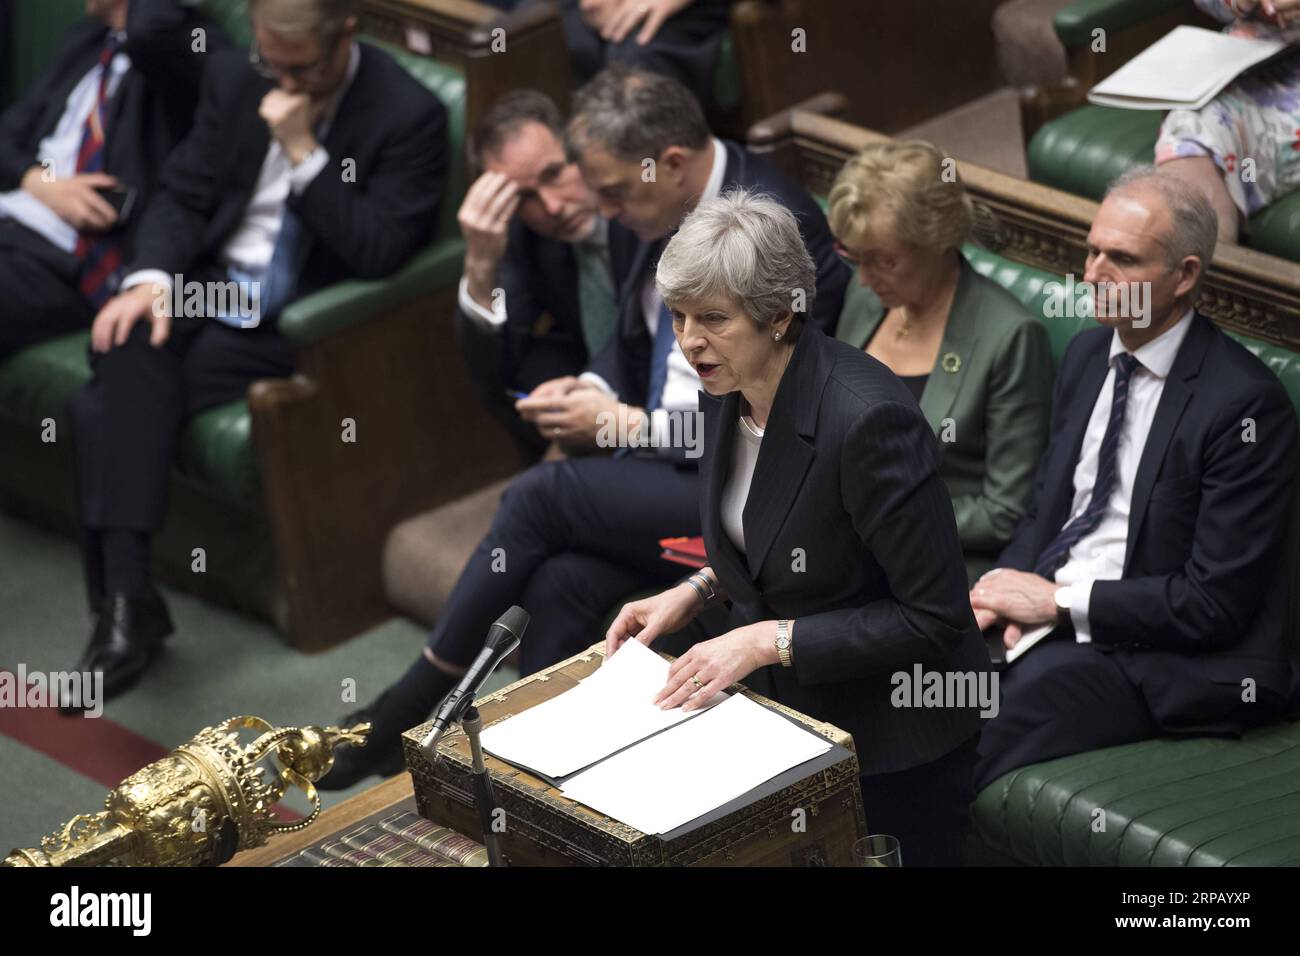 (190522) -- LONDON, May 22, 2019 -- British Prime Minister Theresa May (front) and the leader of the House of Commons Andrea Leadsom (2nd R, rear) attend the Prime Minister s Questions at the House of Commons in London, Britain, on May 22, 2019. The British leader of the House of Commons Andrea Leadsom on Wednesday resigned amid growing discontent with the prime minster s leadership, one day after the new Brexit agreement backfired. ) HOC MANDATORY CREDIT: BRITAIN-LONDON-HOUSE OF COMMONS-LEADER-RESIGNATION UKxParliament/JessicaxTaylor PUBLICATIONxNOTxINxCHN Stock Photo